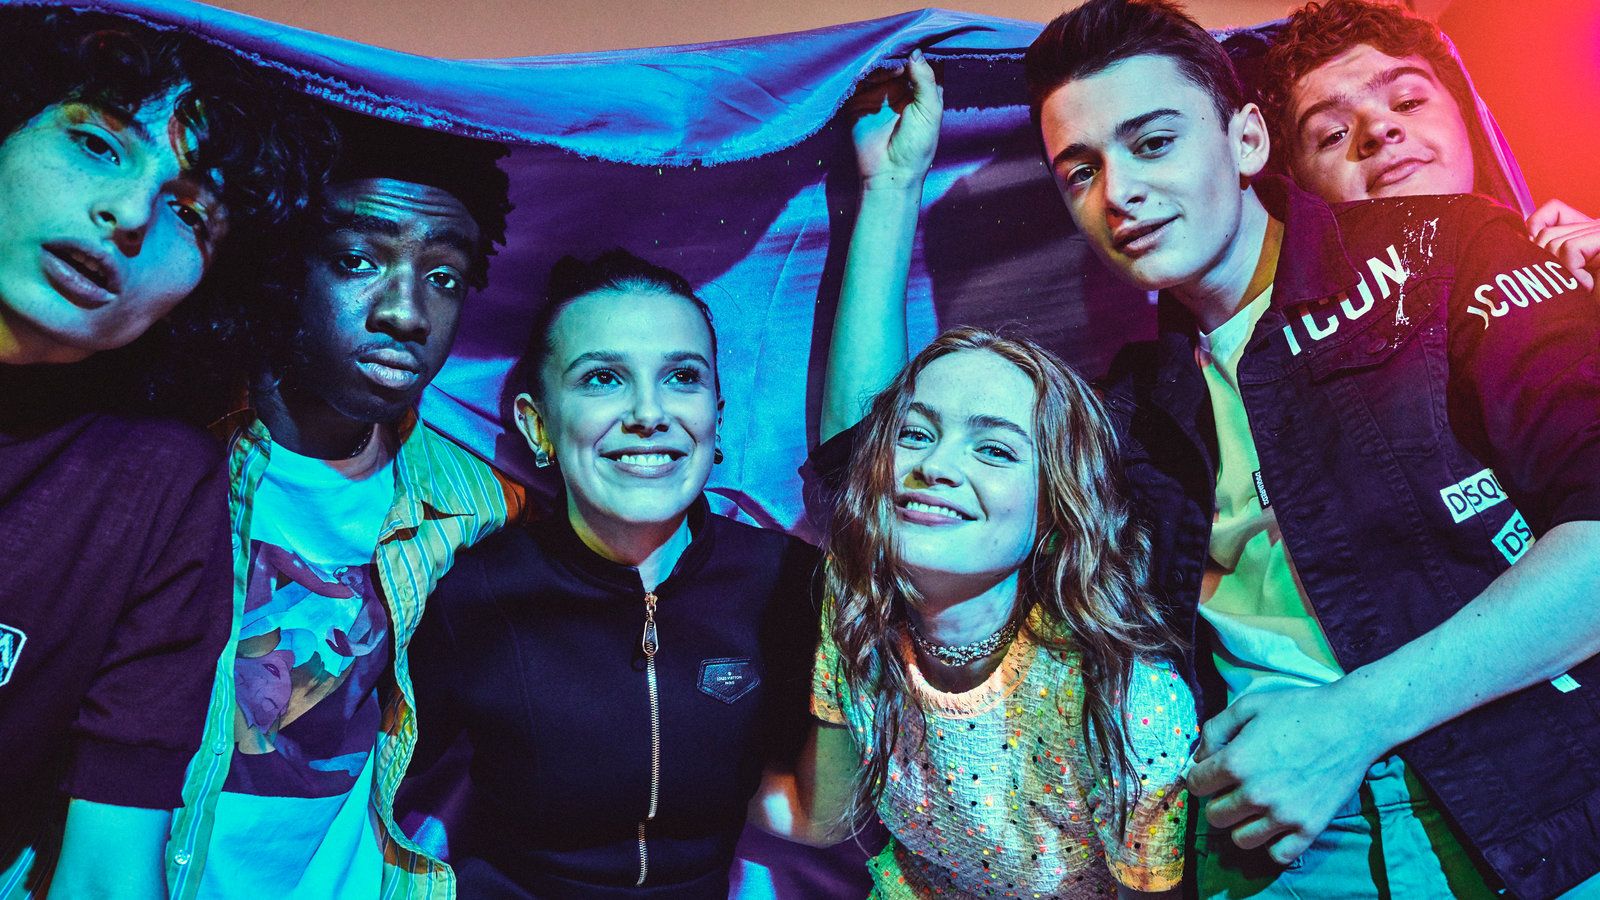 The 'Stranger Things' Kids Reflect on Where They've Been, and Where They're Headed